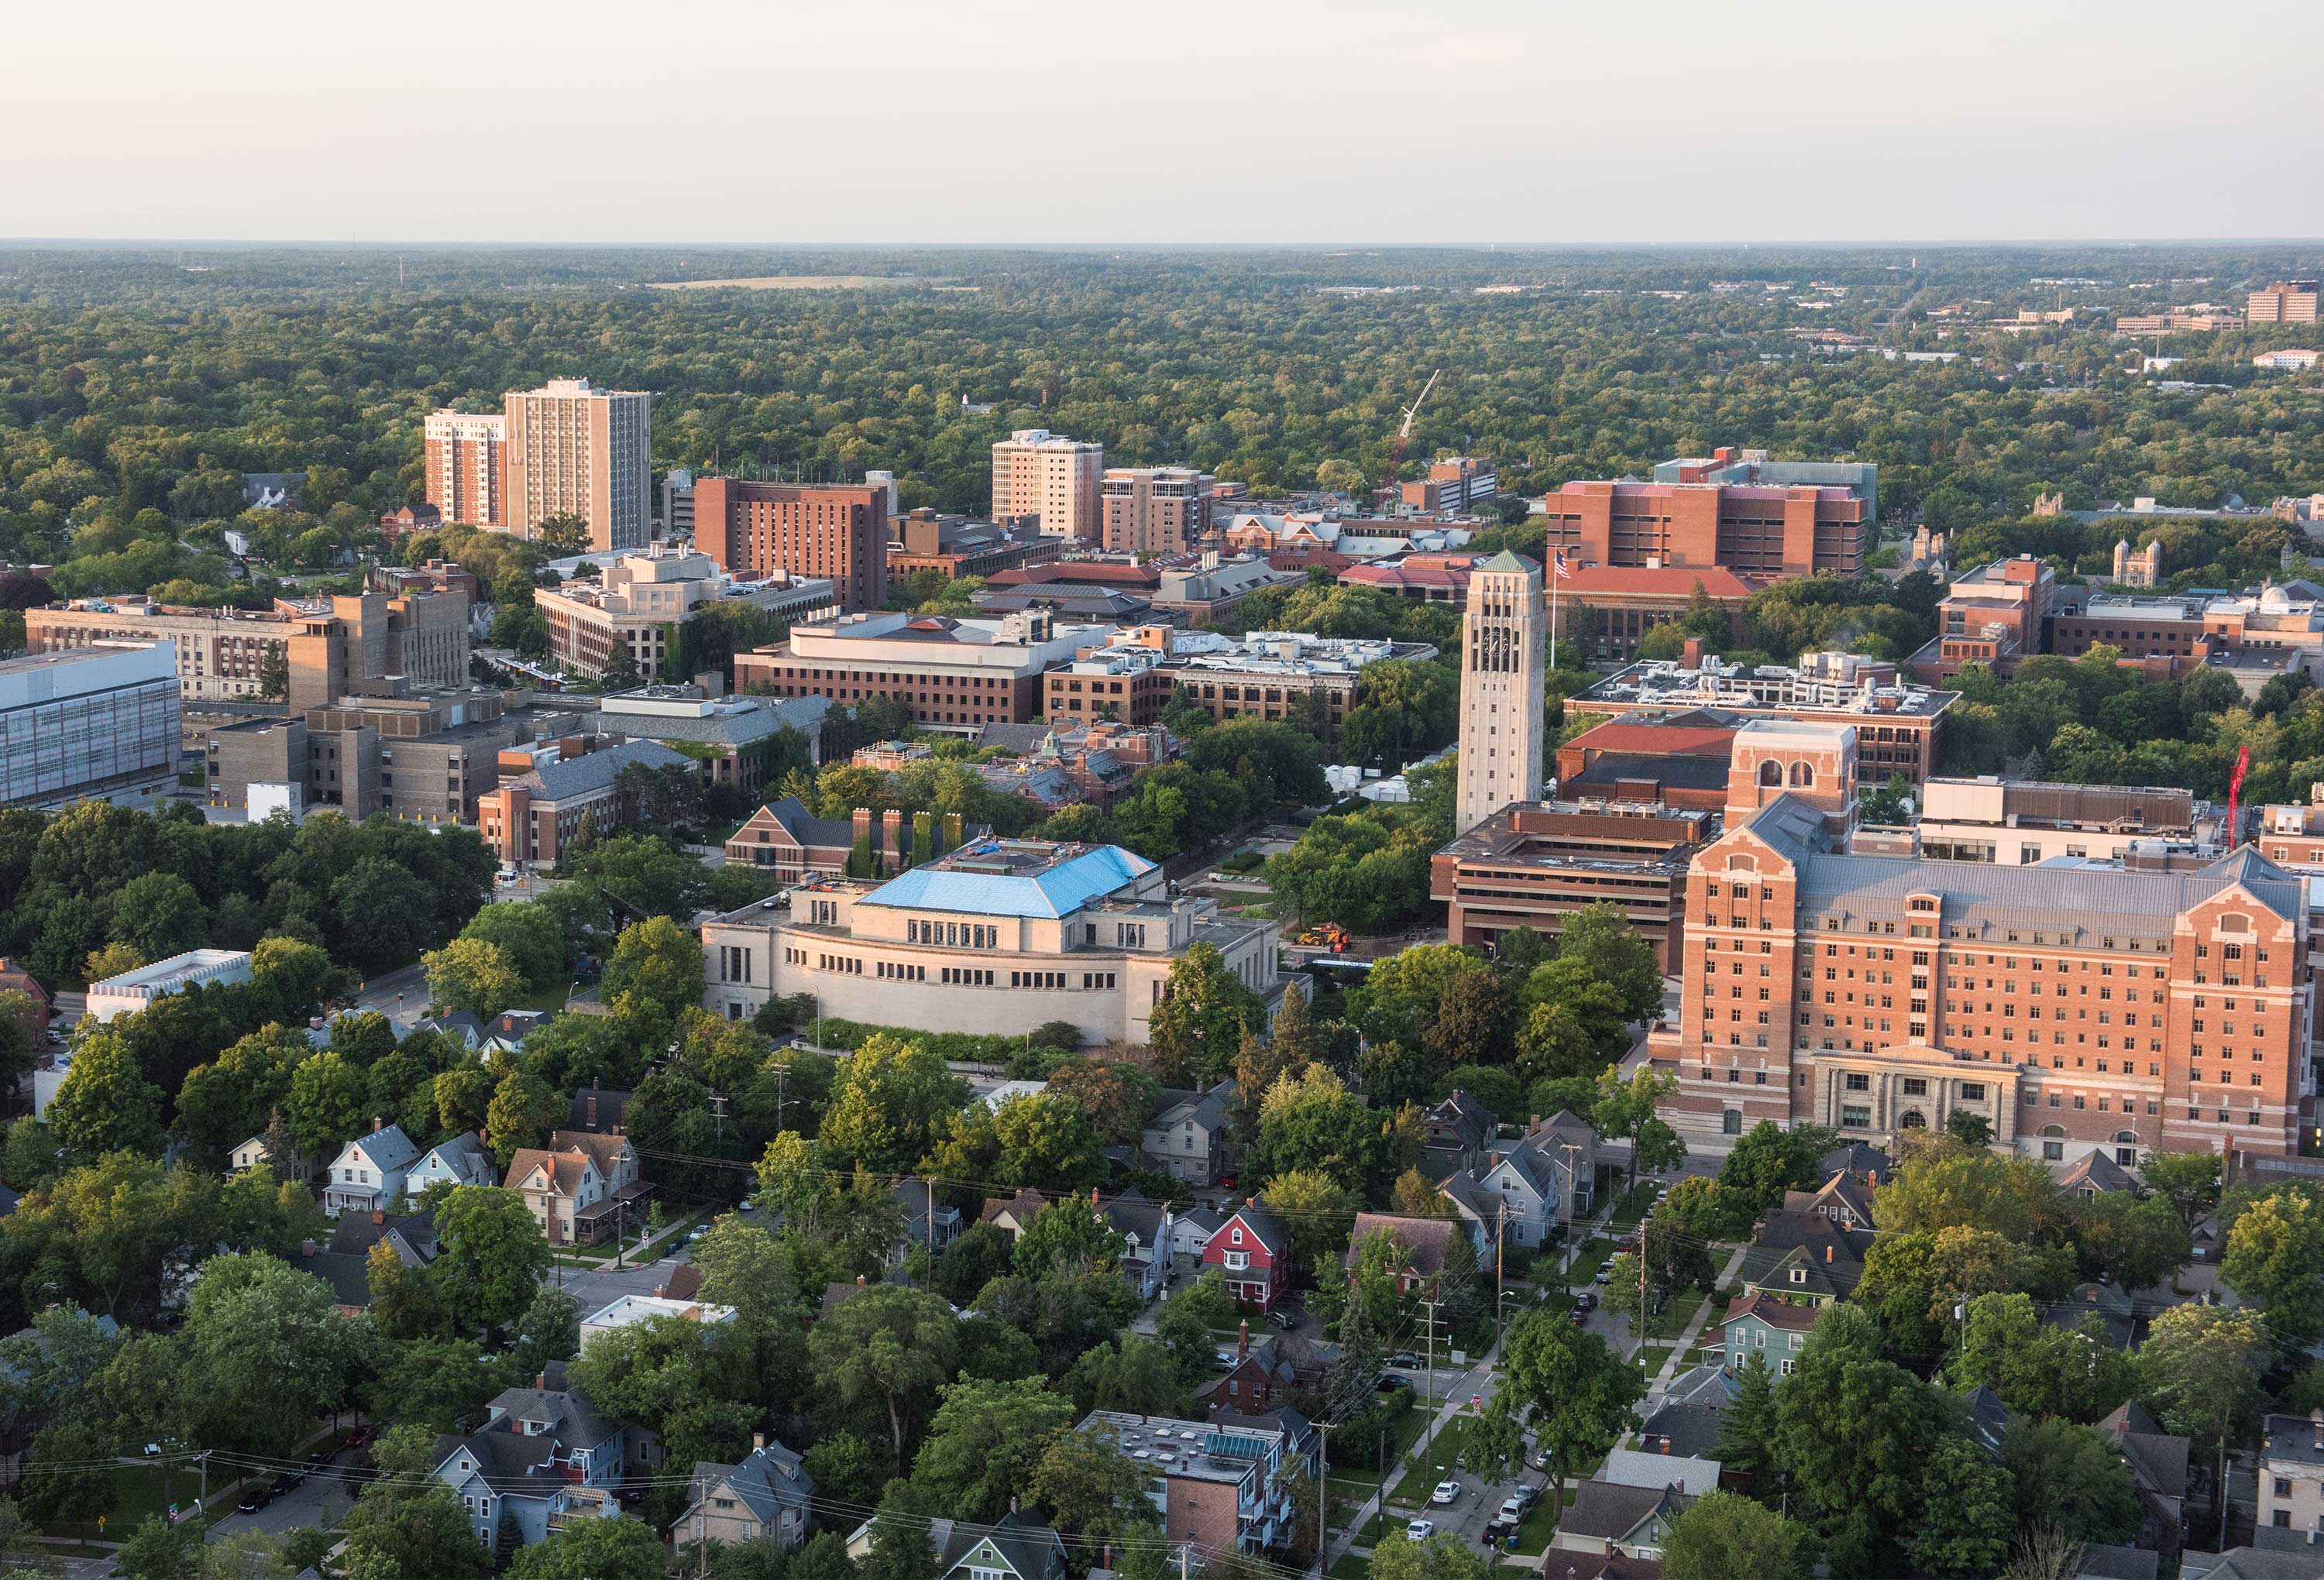 Aerial view of The University of Michigan central campus